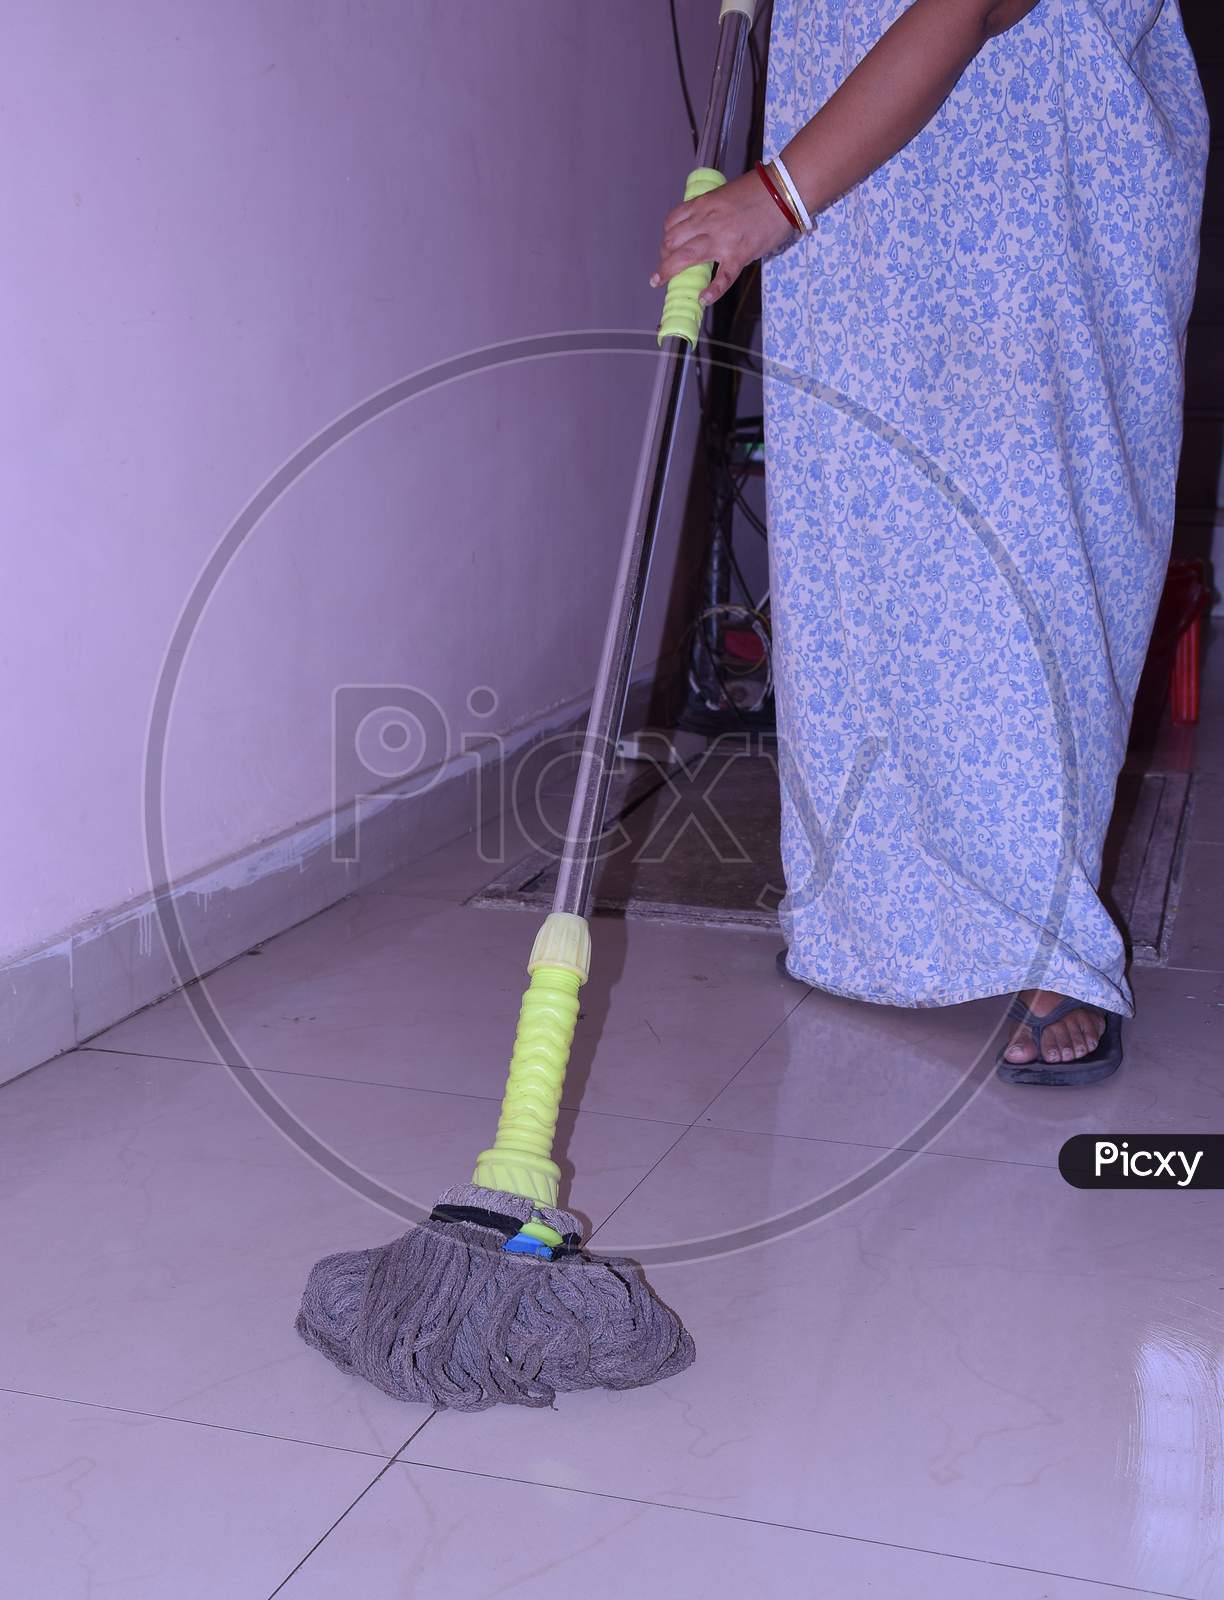 A cleaner mopping the floor